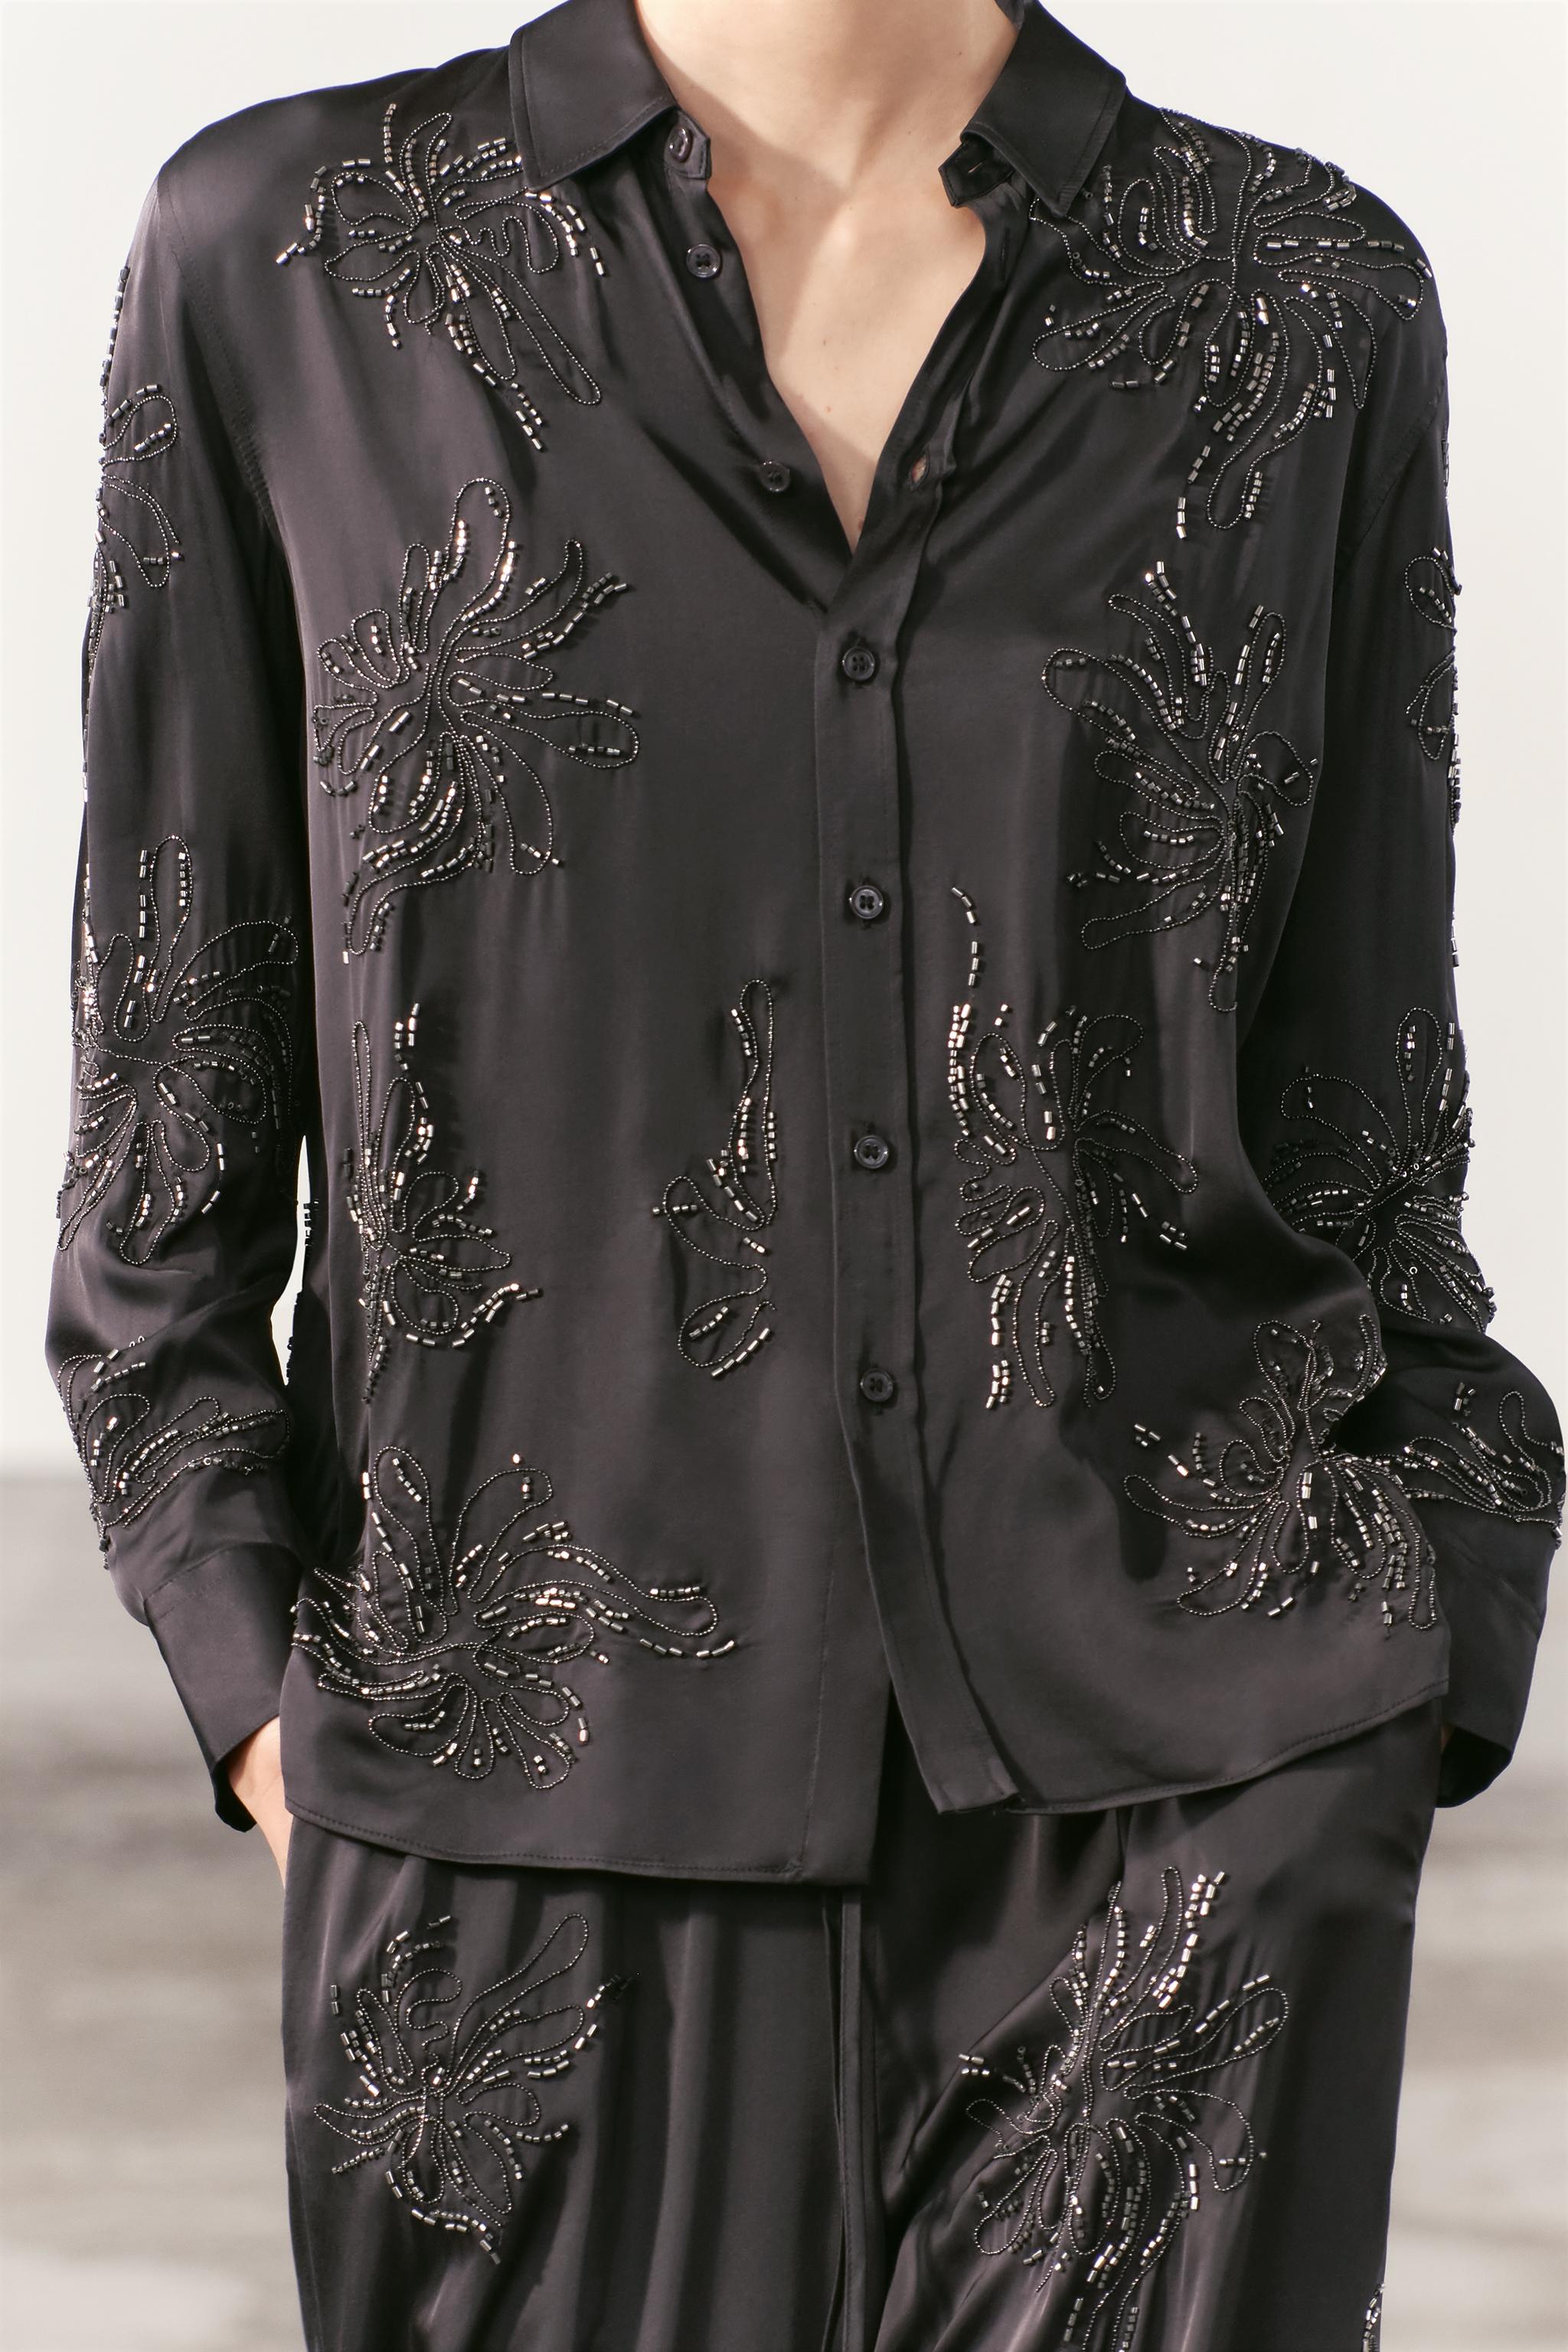 EMBROIDERED BEADED SHIRT ZW COLLECTION - Anthracite grey | ZARA 